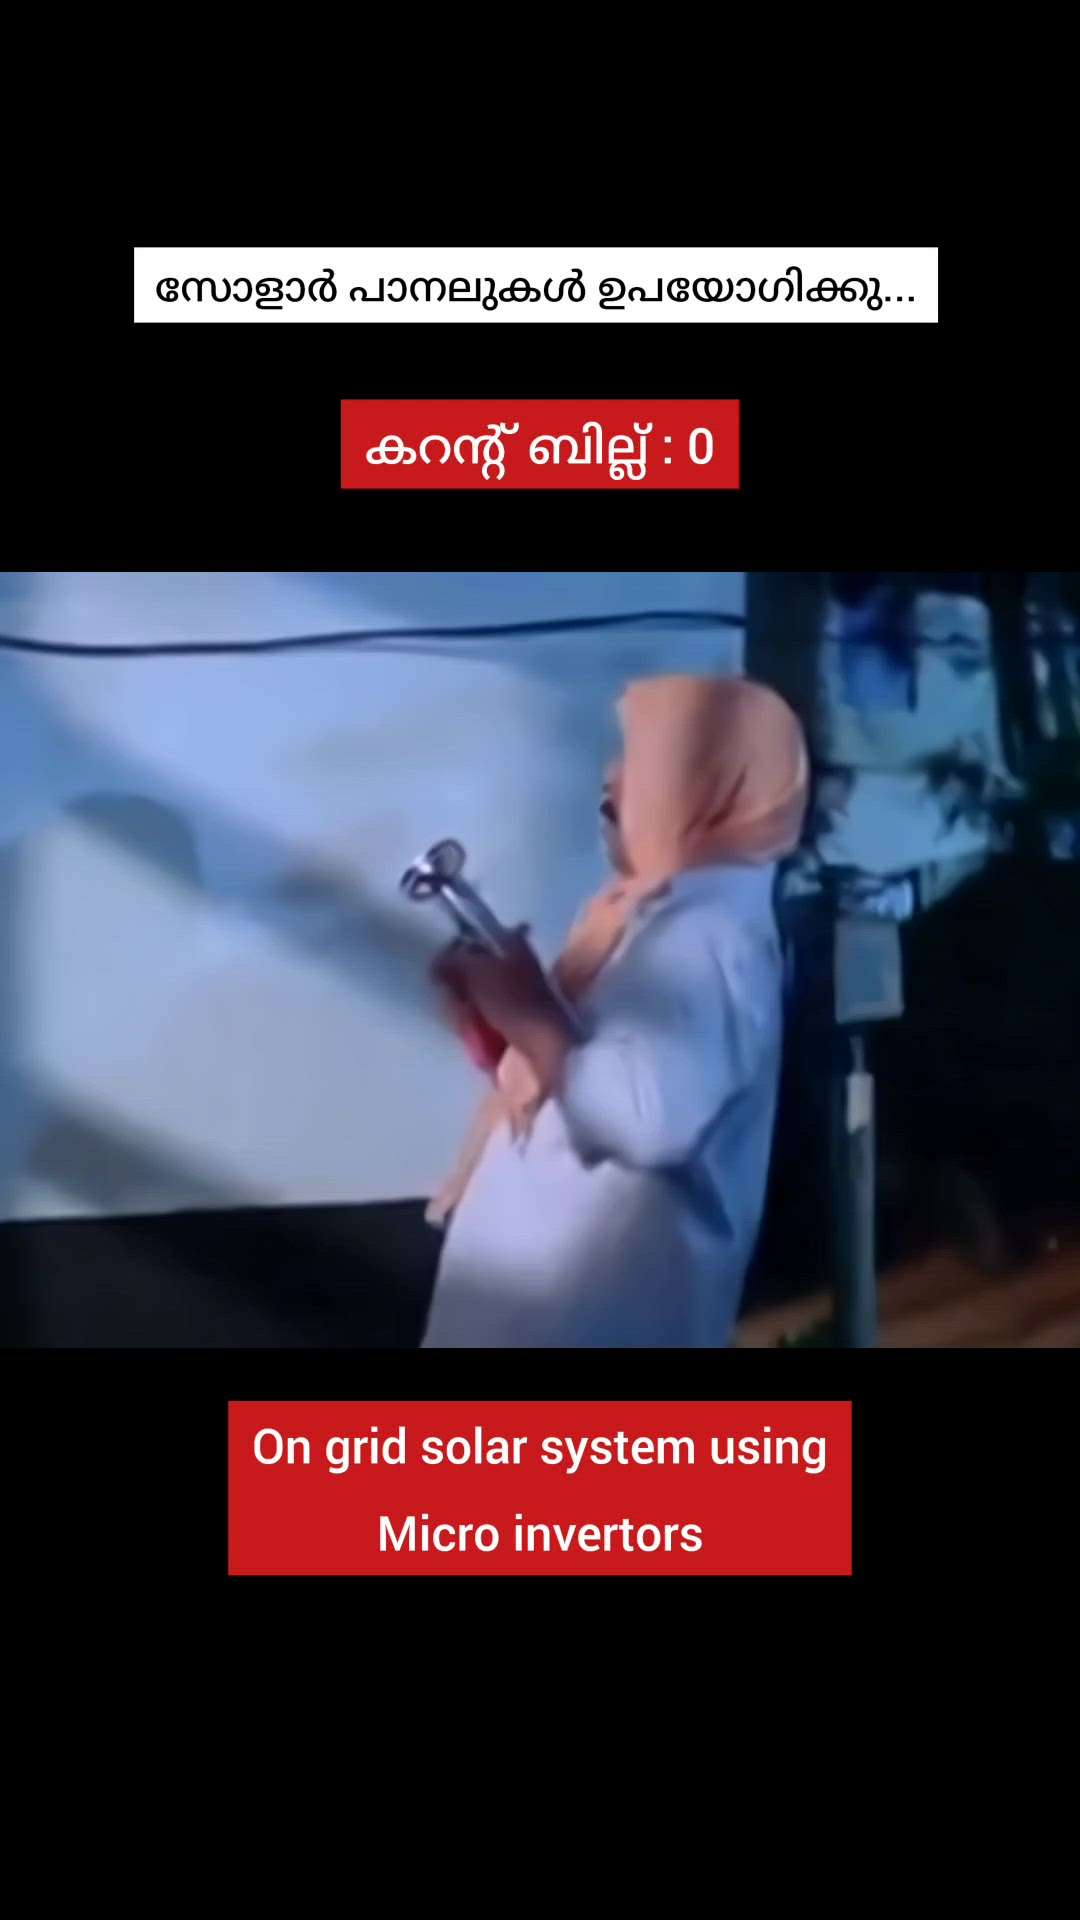 Contact VRC Renewable Energies for product inquiries and services

https://koloapp.in/call/04954265676

#Creatorsofkolo #VRC #renewable #solar #microinvertors #tips